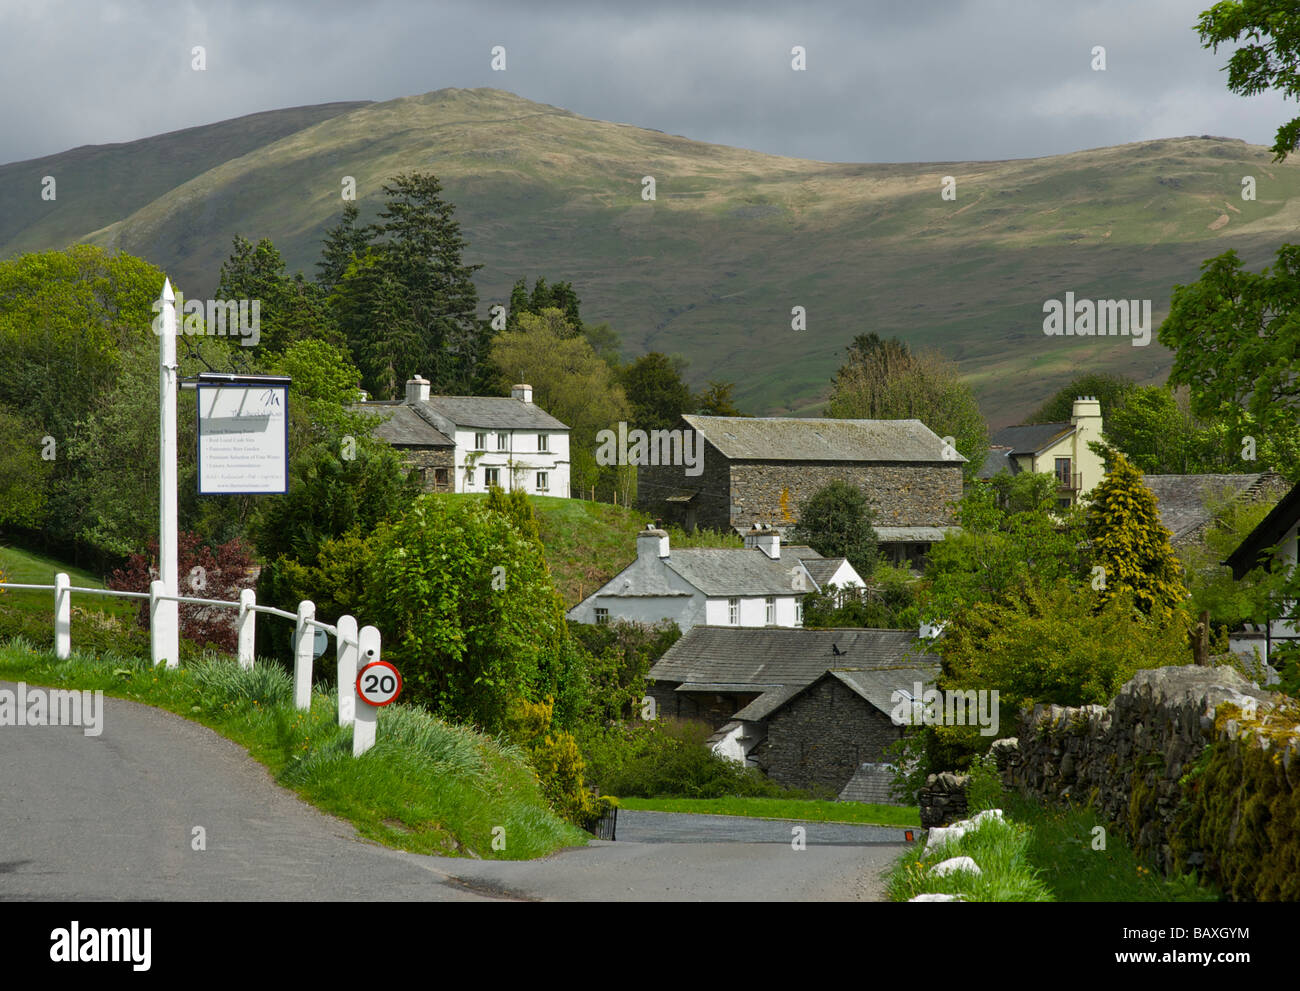 The village of Troutbeck, and sign for the Mortal Man pub, Lake District National Park, Cumbria, England UK Stock Photo